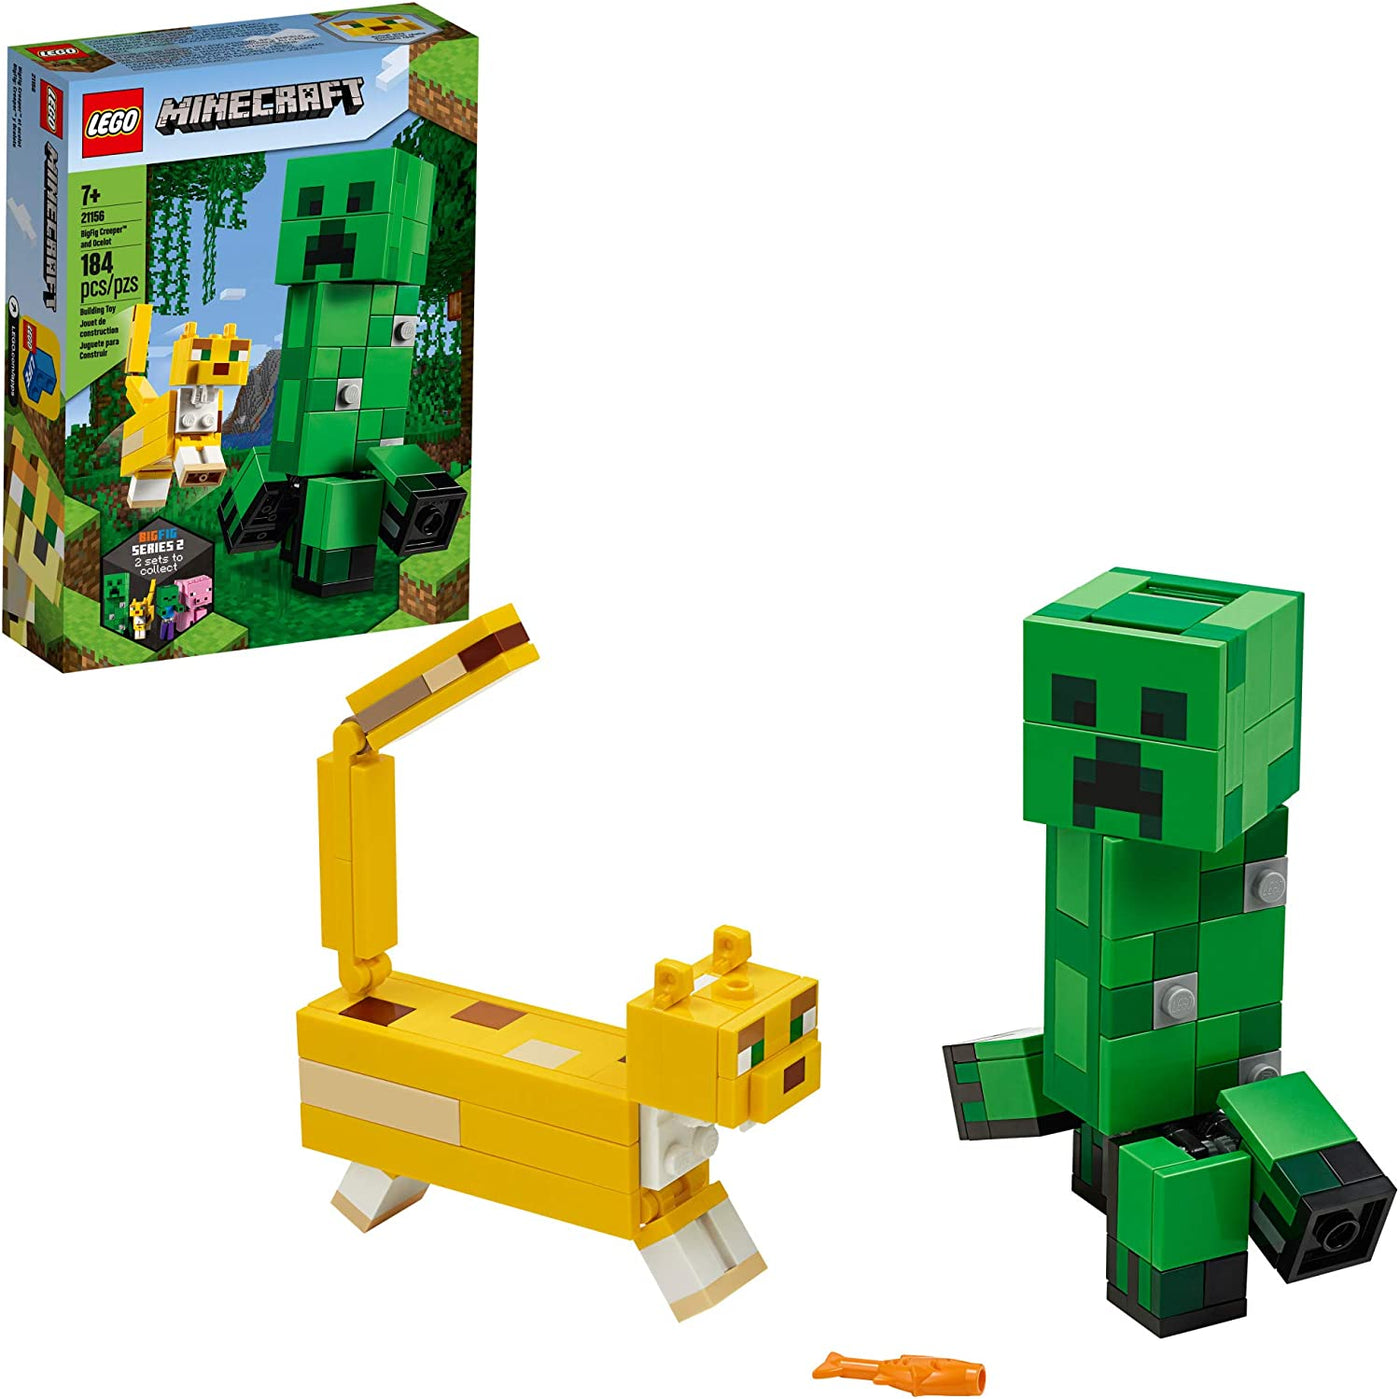 LEGO Minecraft Creeper BigFig and Ocelot Characters, 21156 (184 Pieces)